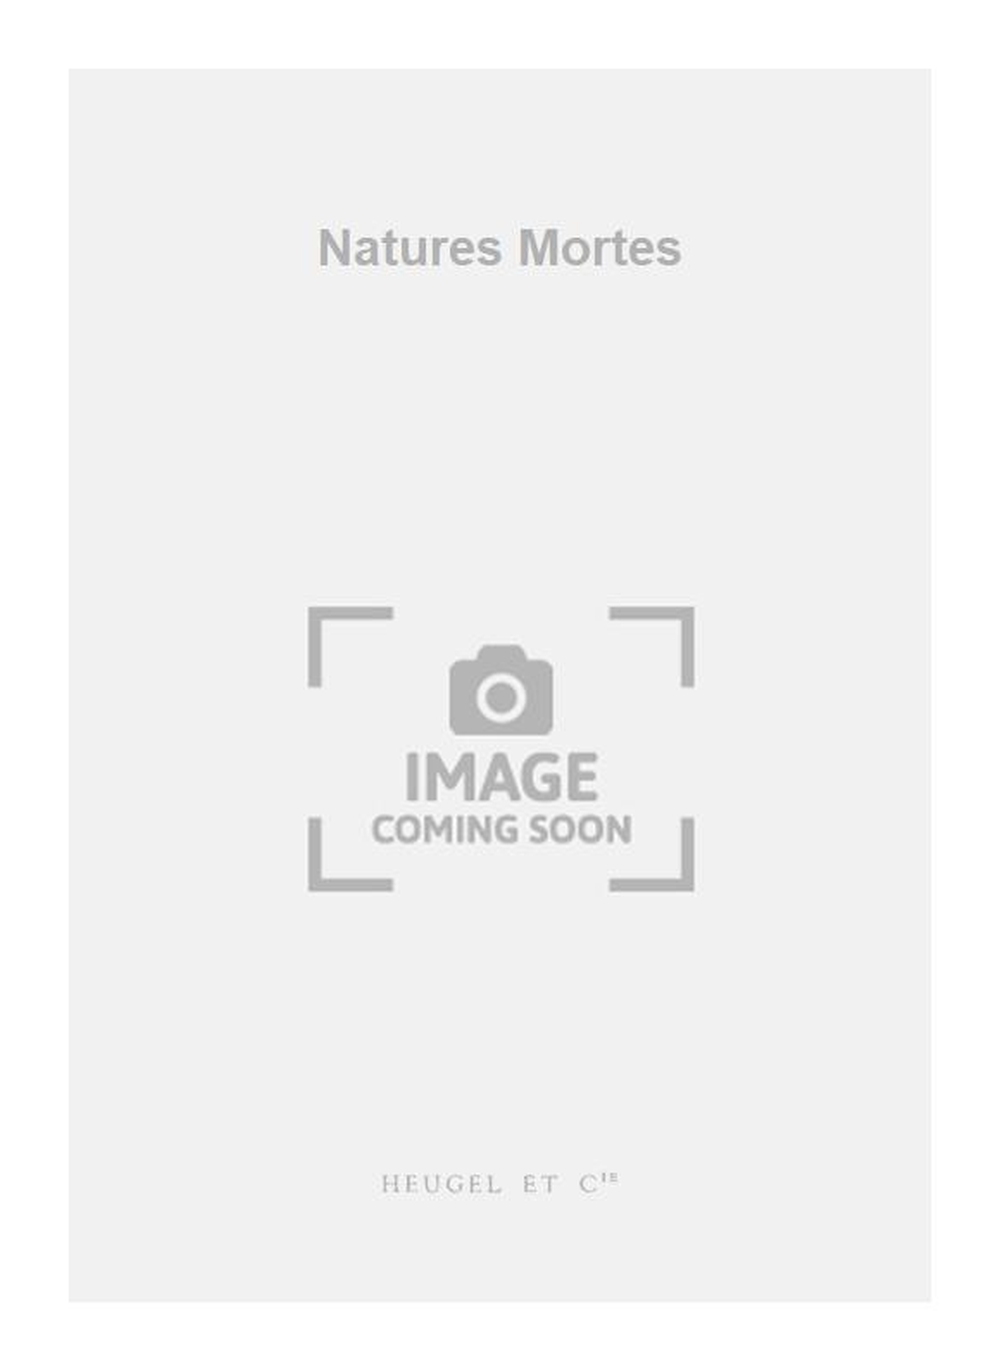 Racol: Natures Mortes